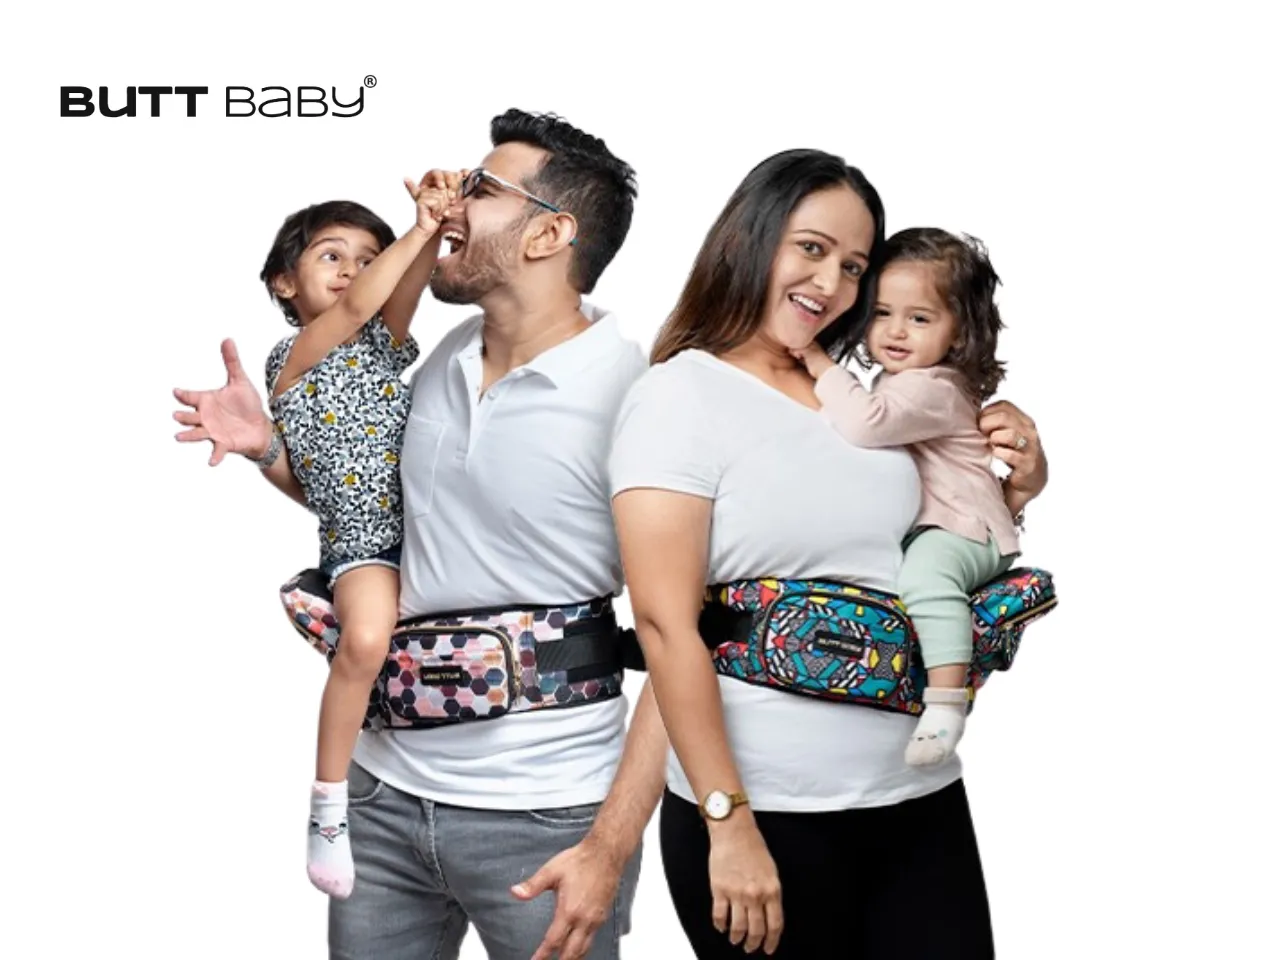 This baby care brand started with Rs 4 lakh investment and now generates Rs 4.25 crore in revenue